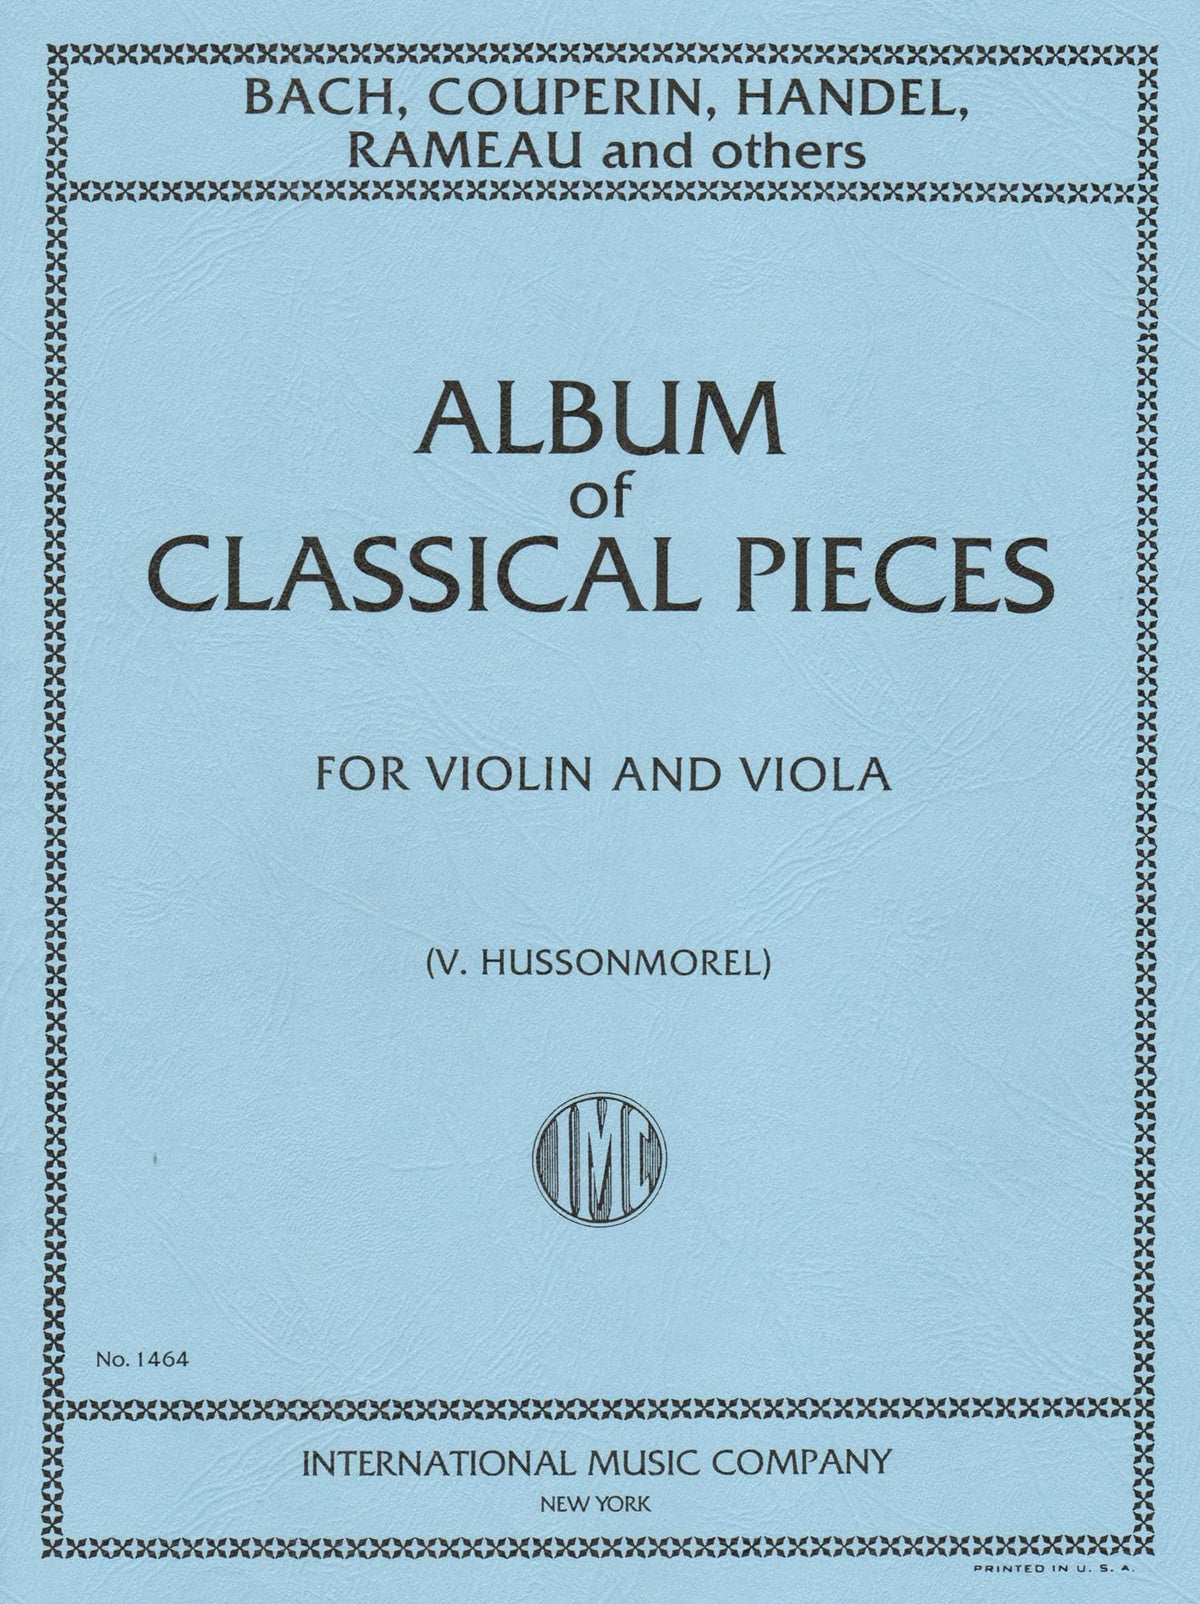 Album of Classical Pieces - Violin and Viola - edited by V Hussonmorel - International Music Co